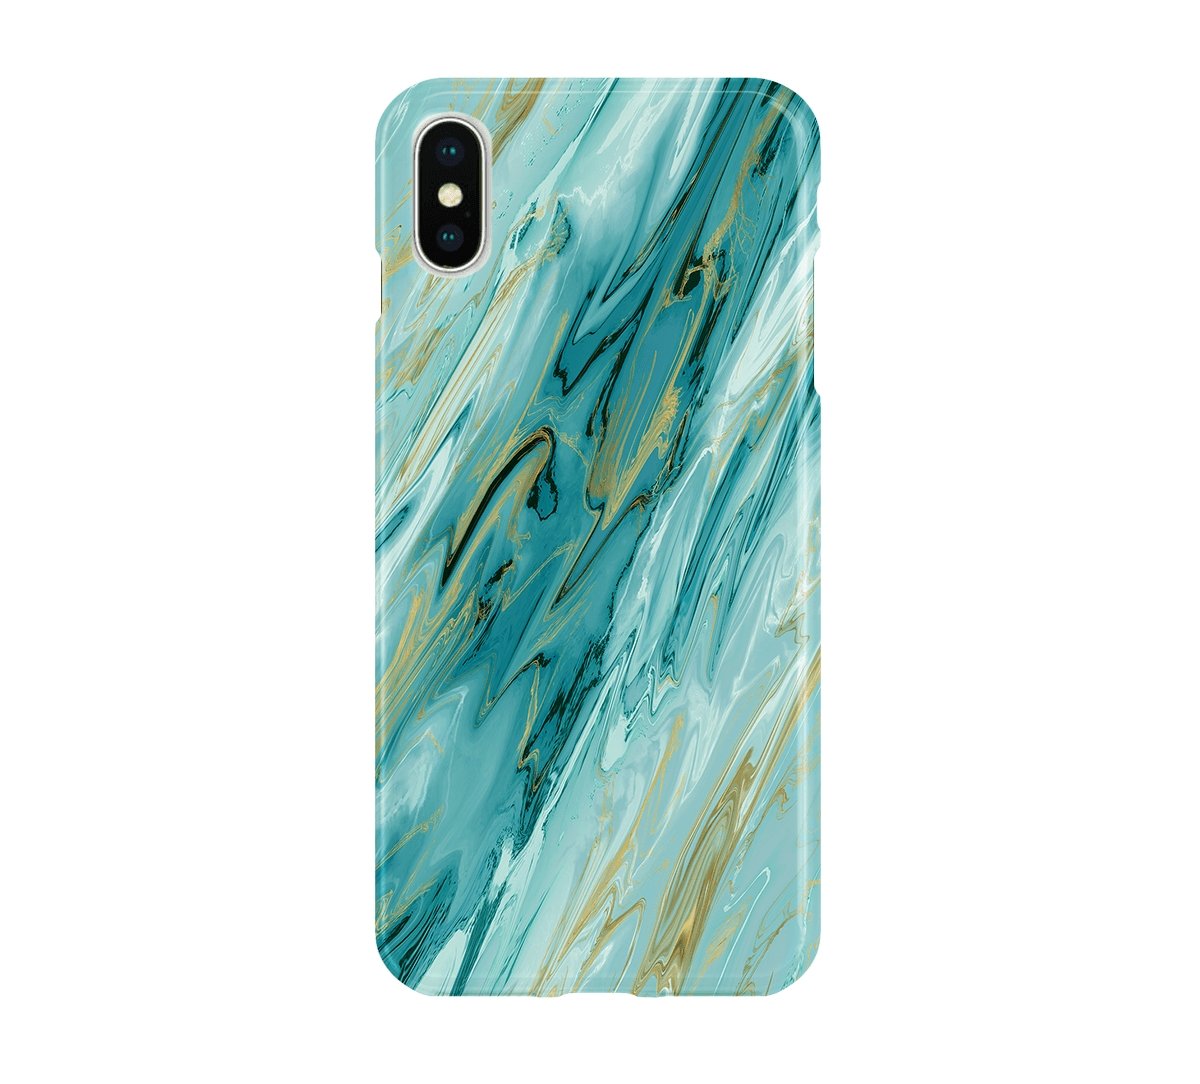 Turquoise & Gold Agate - iPhone phone case designs by CaseSwagger